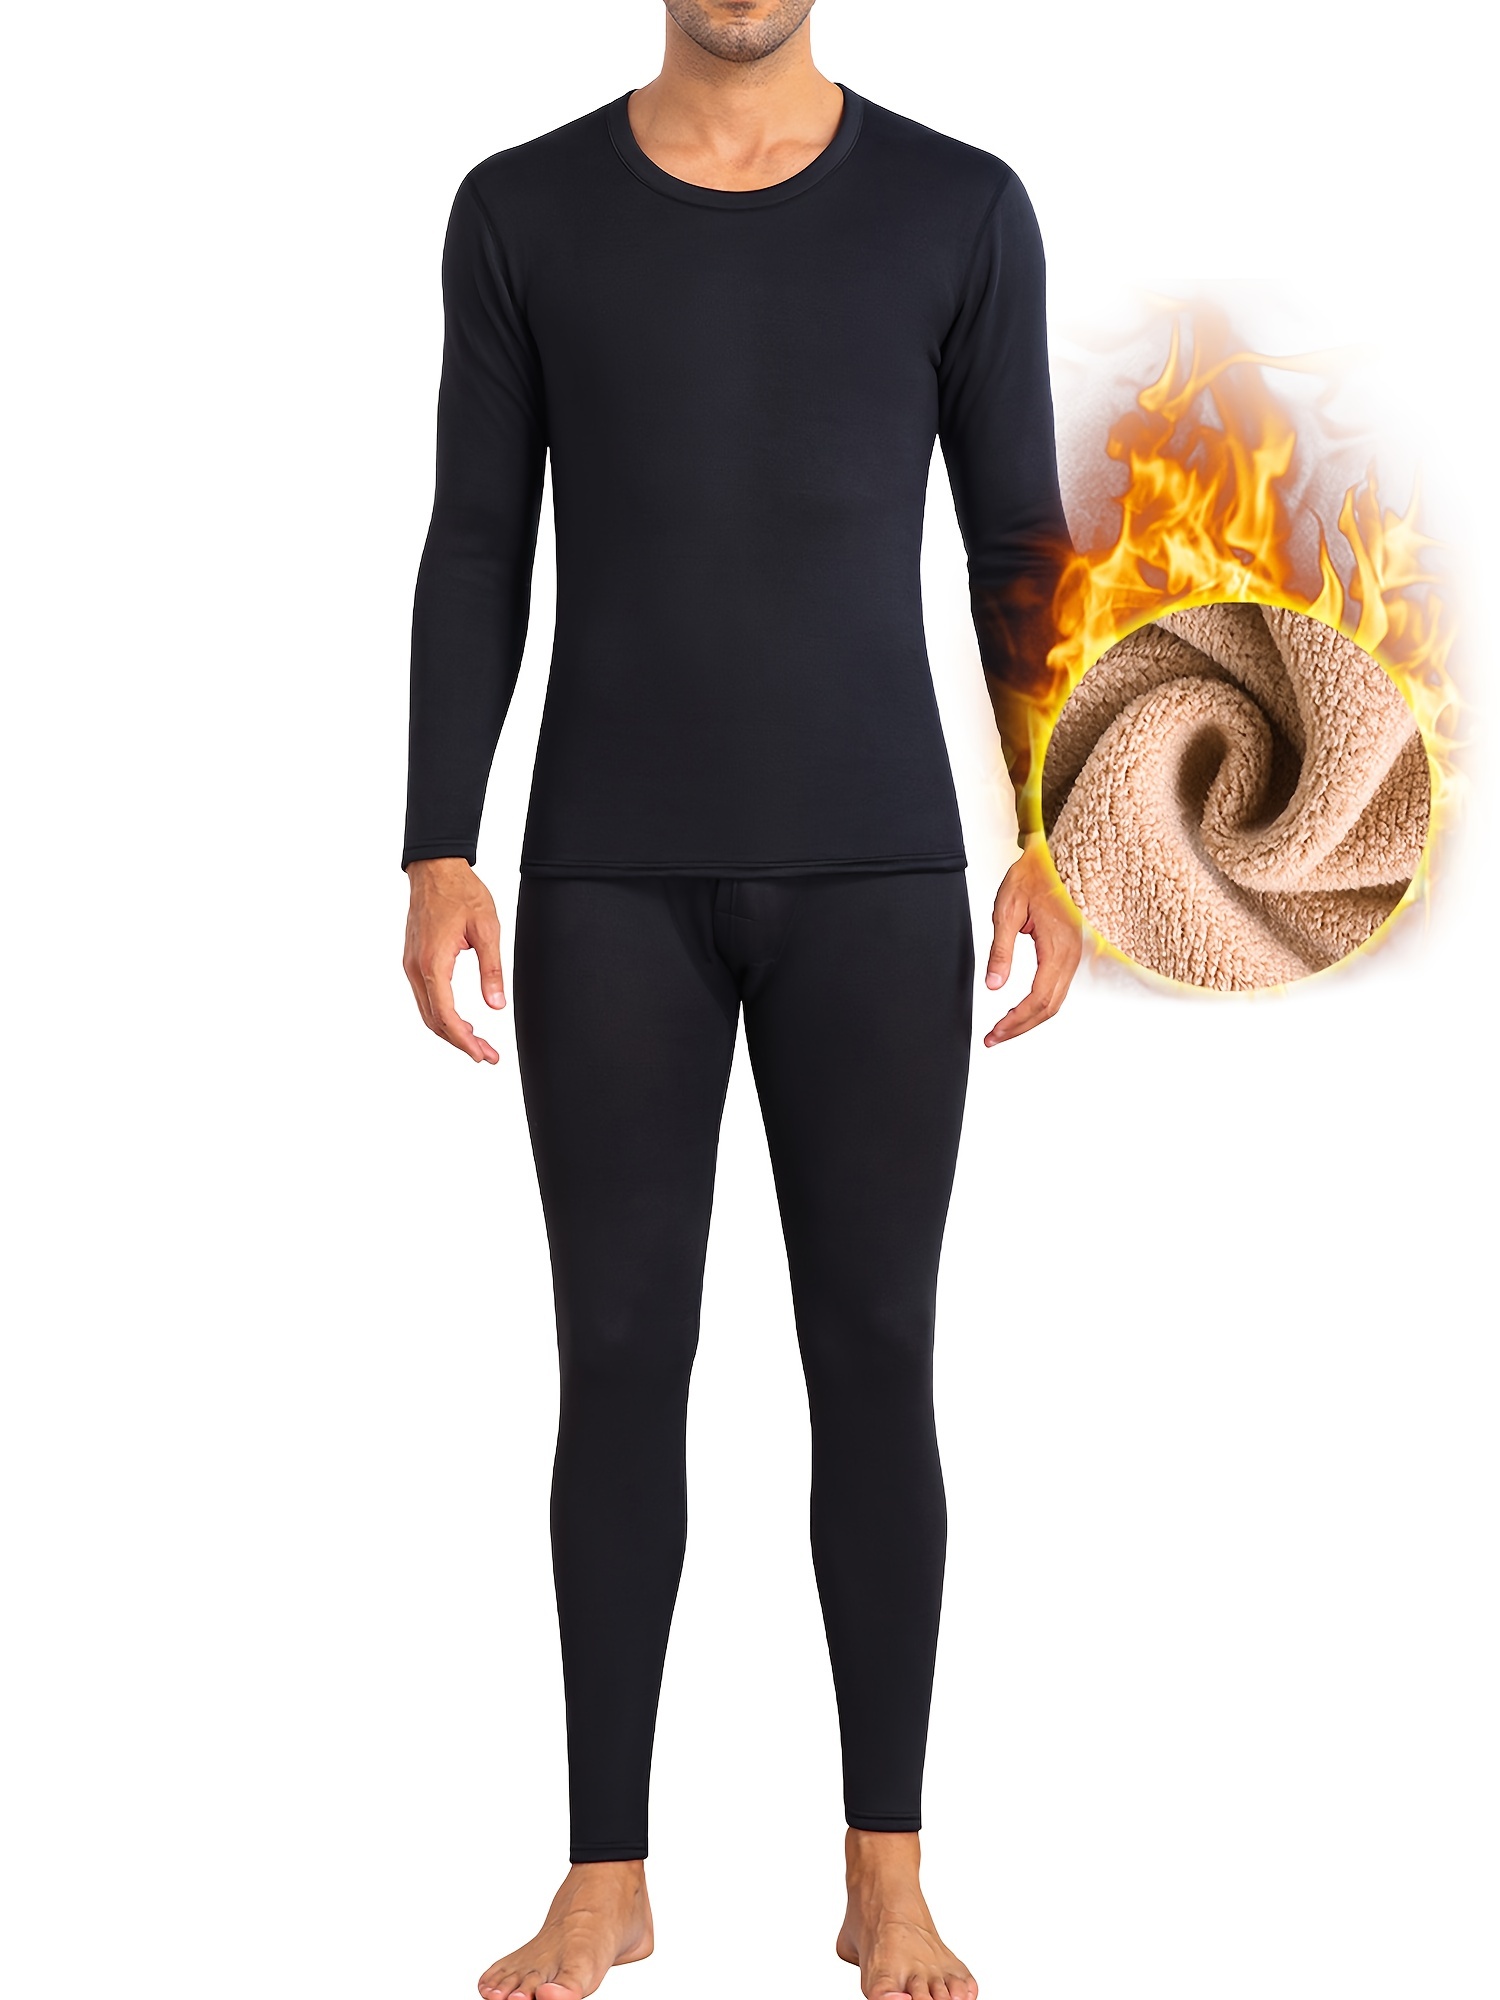 Electric Heated Thermal Underwear Set, Men's USB Travel Heated Pants and  Shirt with 30 Fever Energy Magnets (Color : Black, Size : Small) at   Men's Clothing store